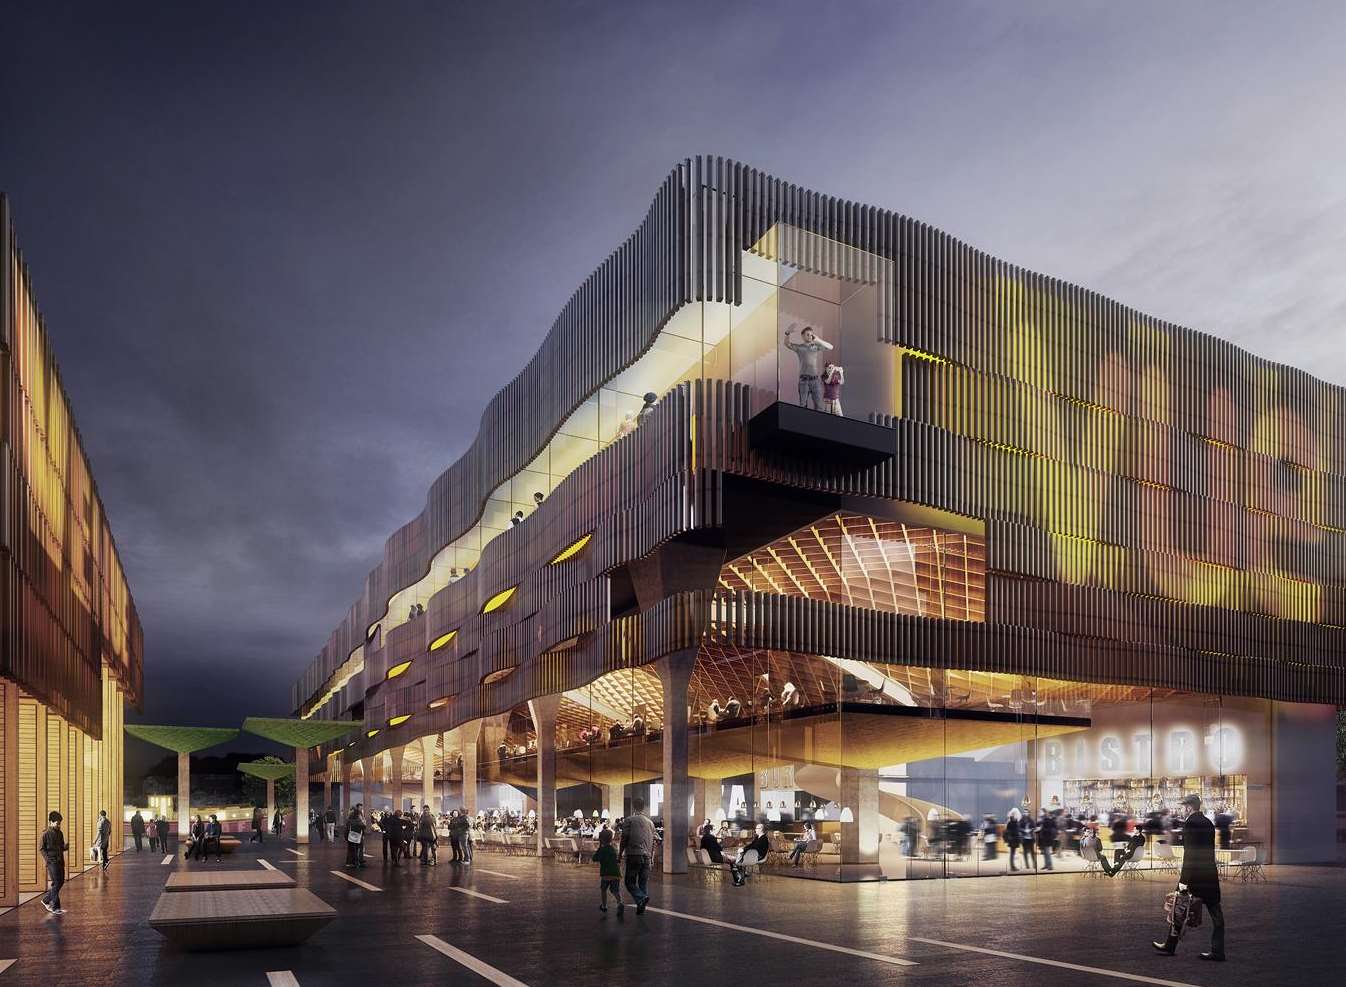 An artist's impression of a multi-screen cinema, restaurants and entertainment venue